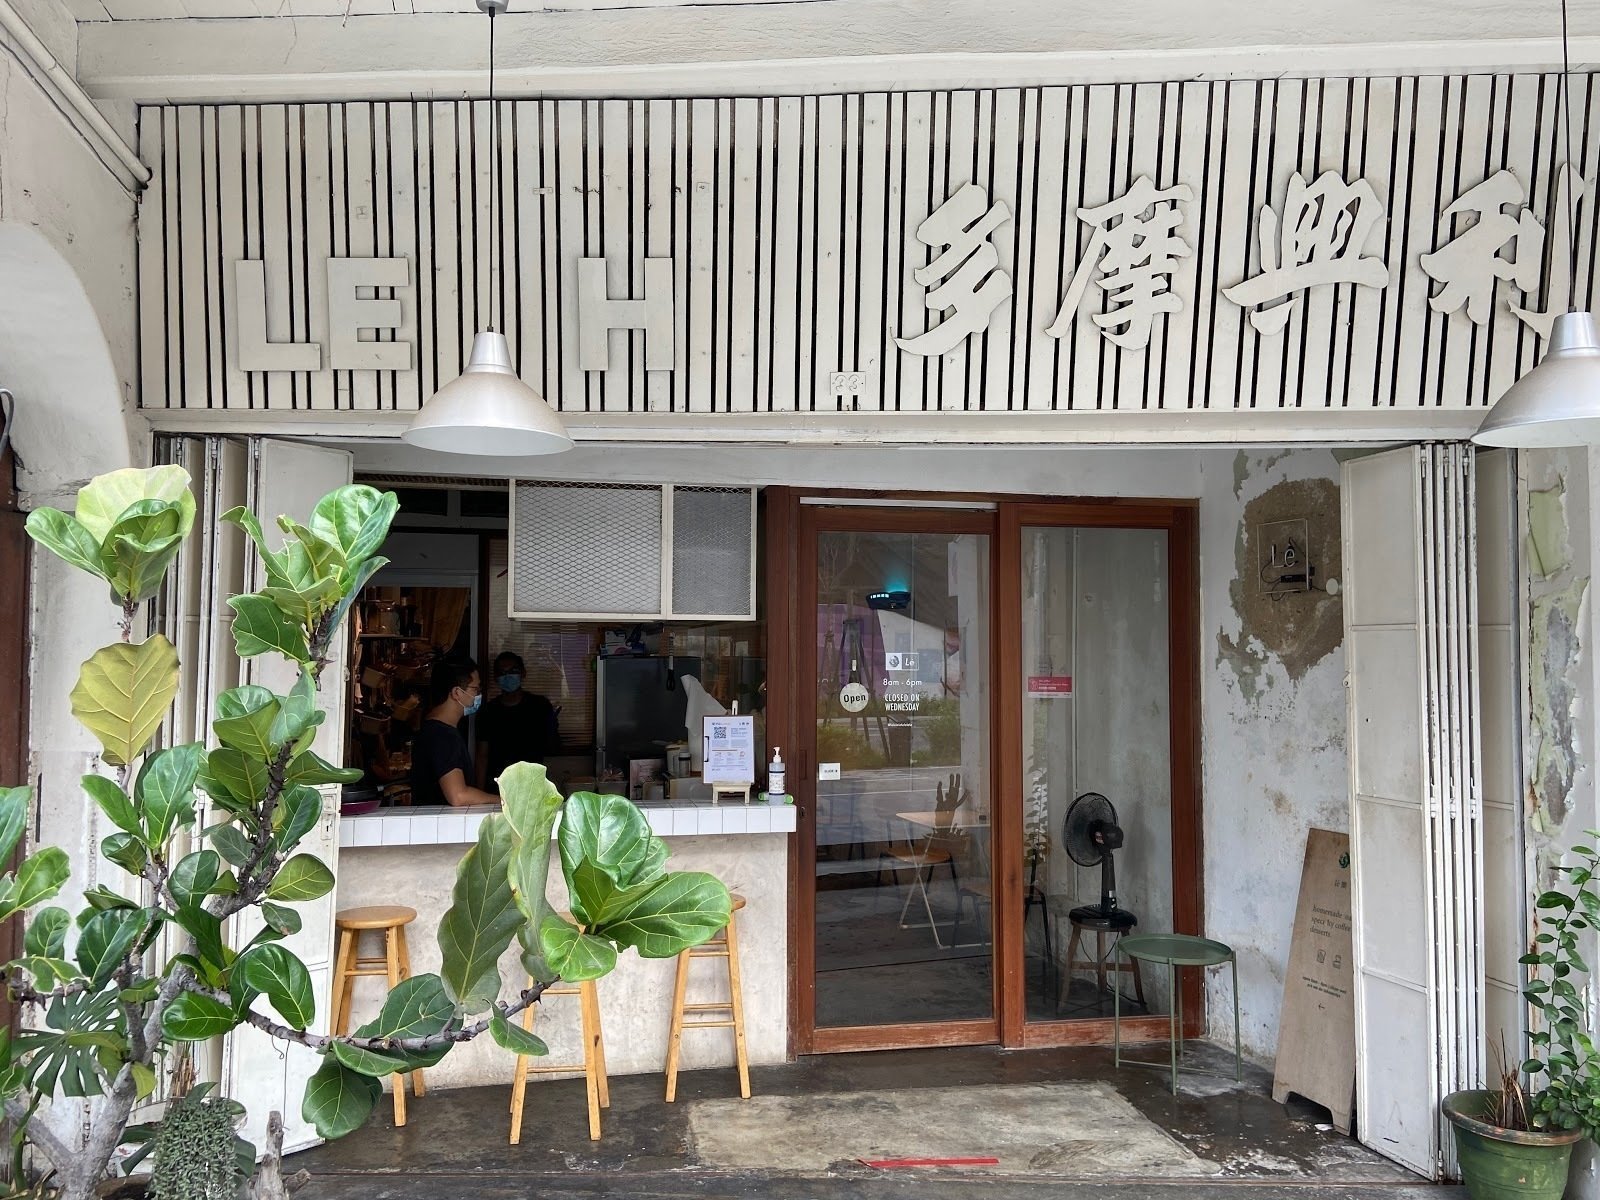 <span class="translation_missing" title="translation missing: en.meta.location_title, location_name: Le Cafe, city: Penang">Location Title</span>